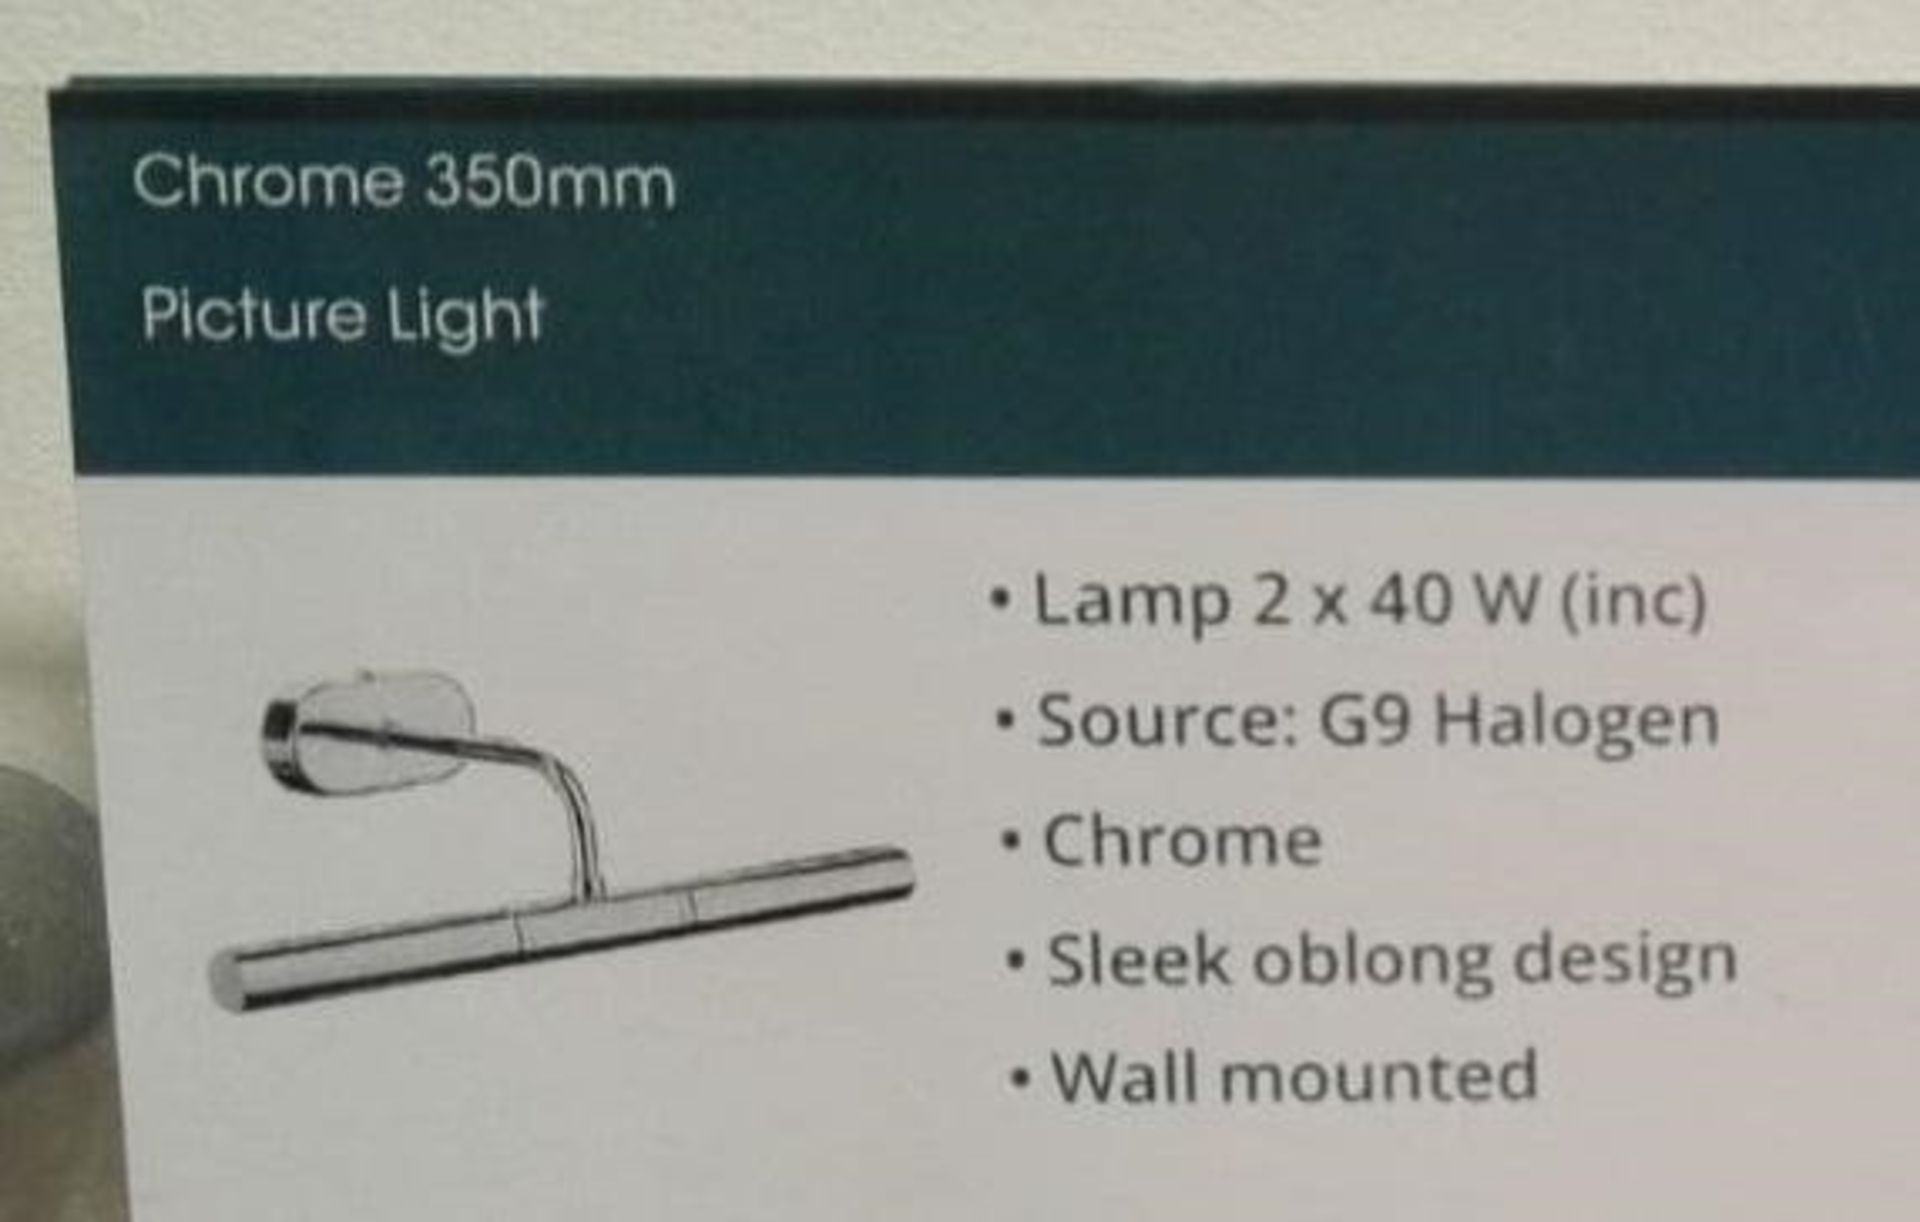 1 x Chrome 350mm Picture Light - Chrome Finish - Ex-Display Item, Mounted On Backboard - Dimensions: - Image 2 of 2